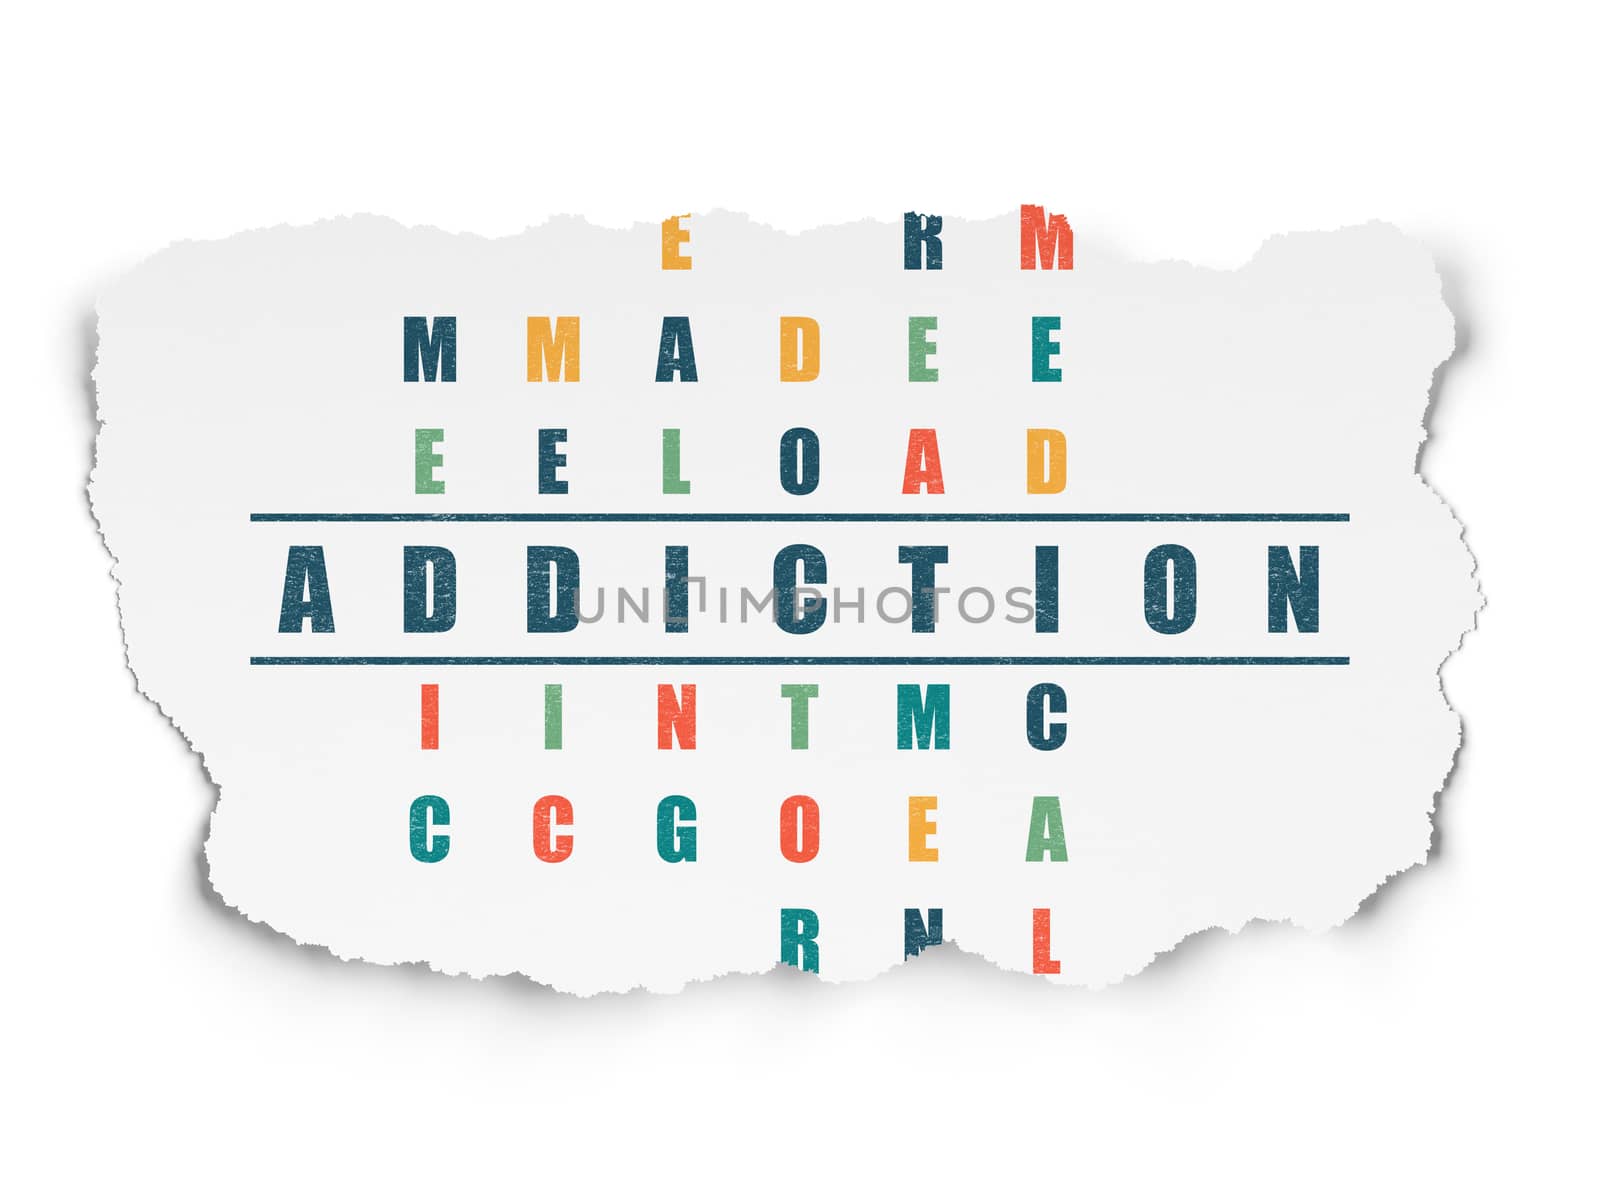 Healthcare concept: Addiction in Crossword Puzzle by maxkabakov